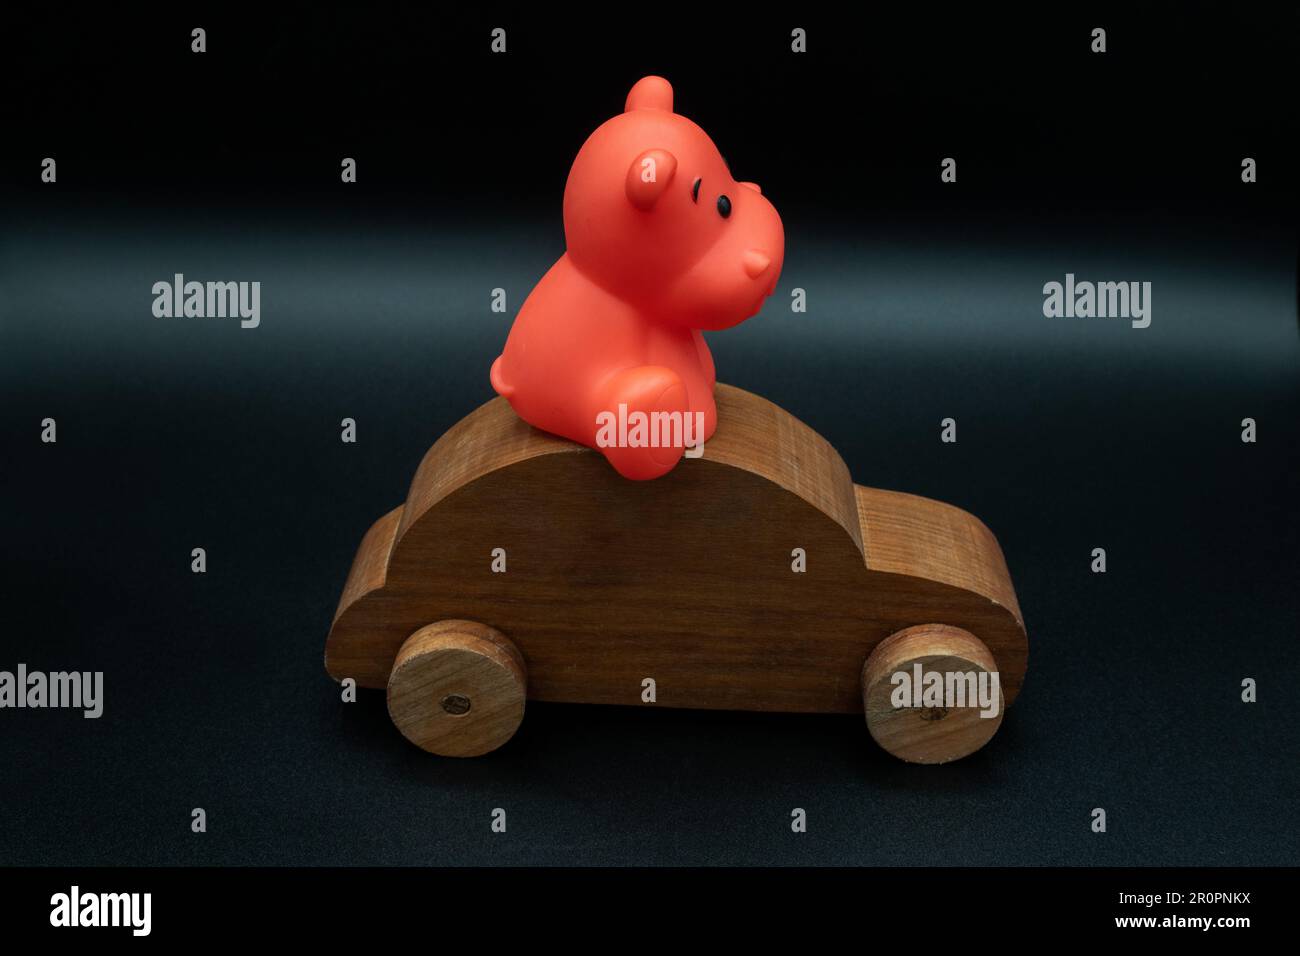 wooden toy car made from cherry wood with a toy animal riding on top, isolated on a black background, side view, profile, concept, driving, parking Stock Photo